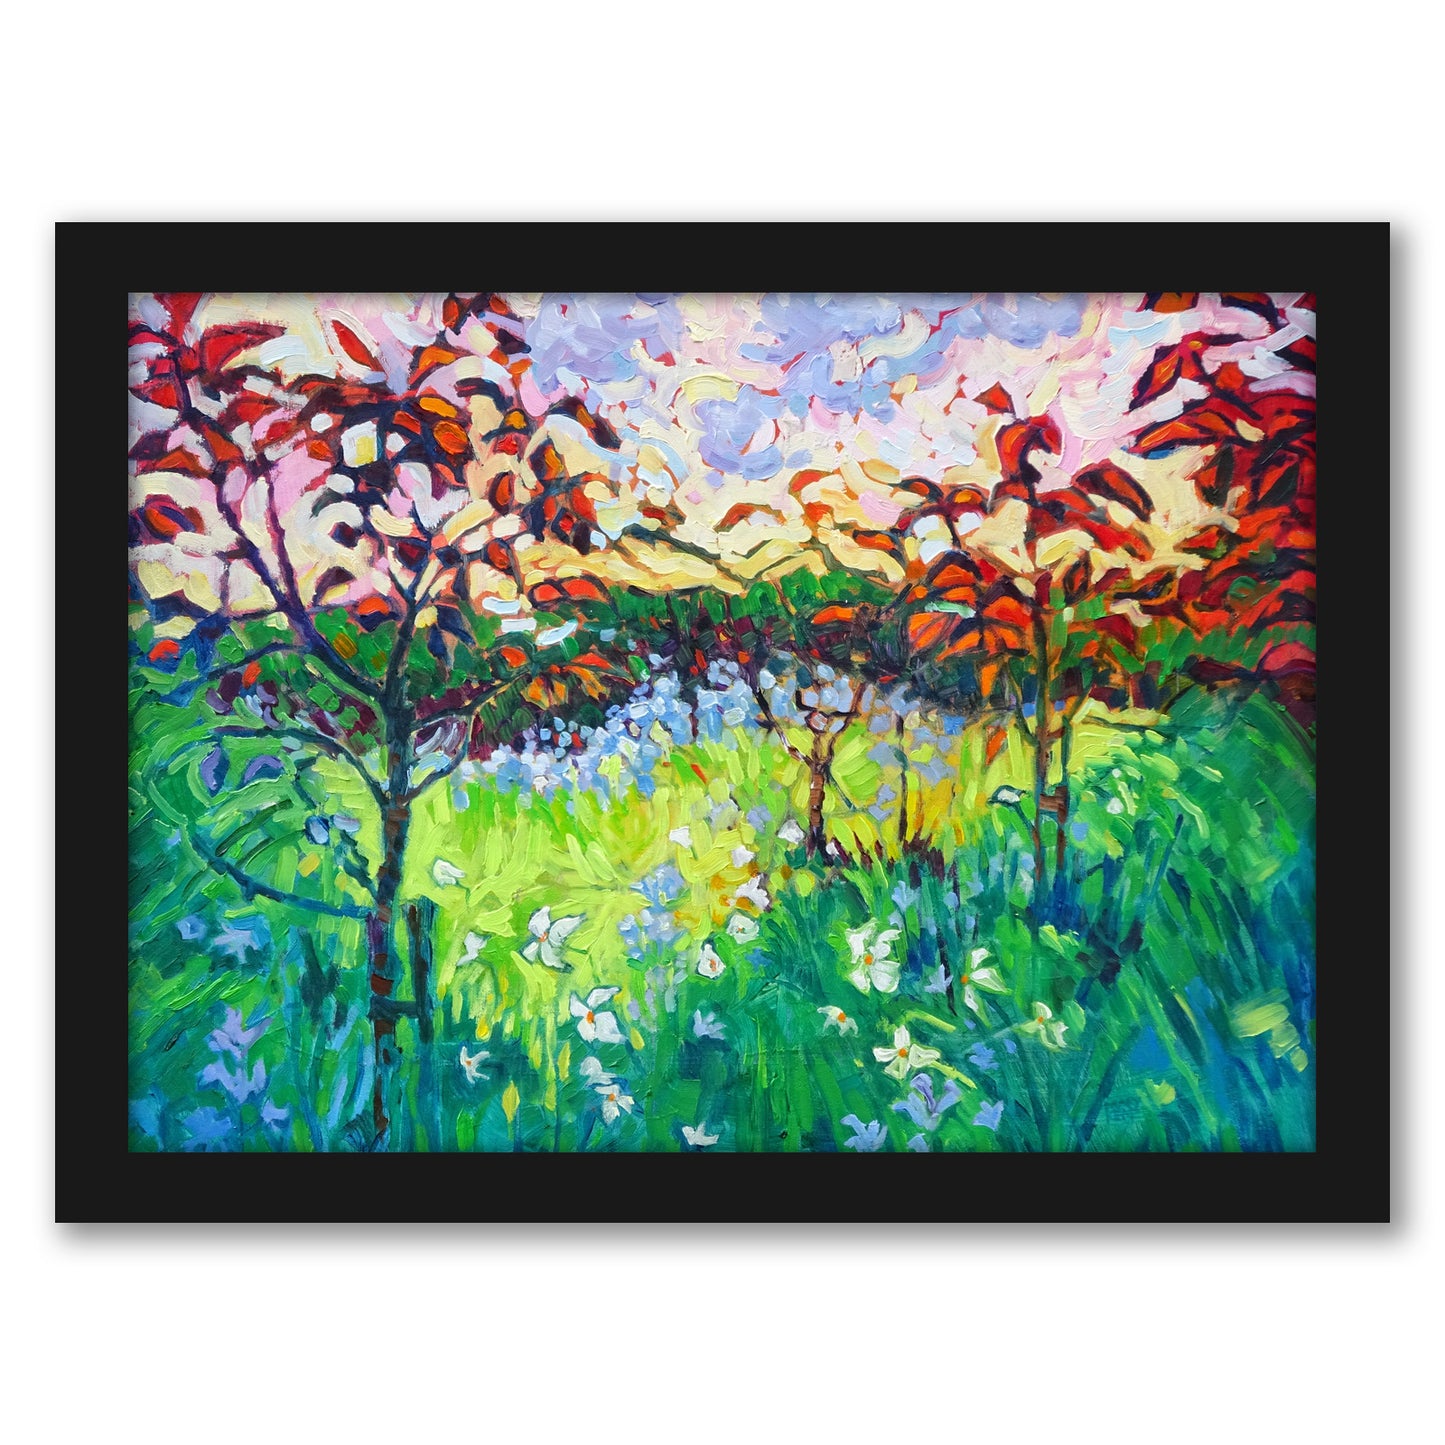 Garden At Houghton Hall By Mary Kemp - Framed Print